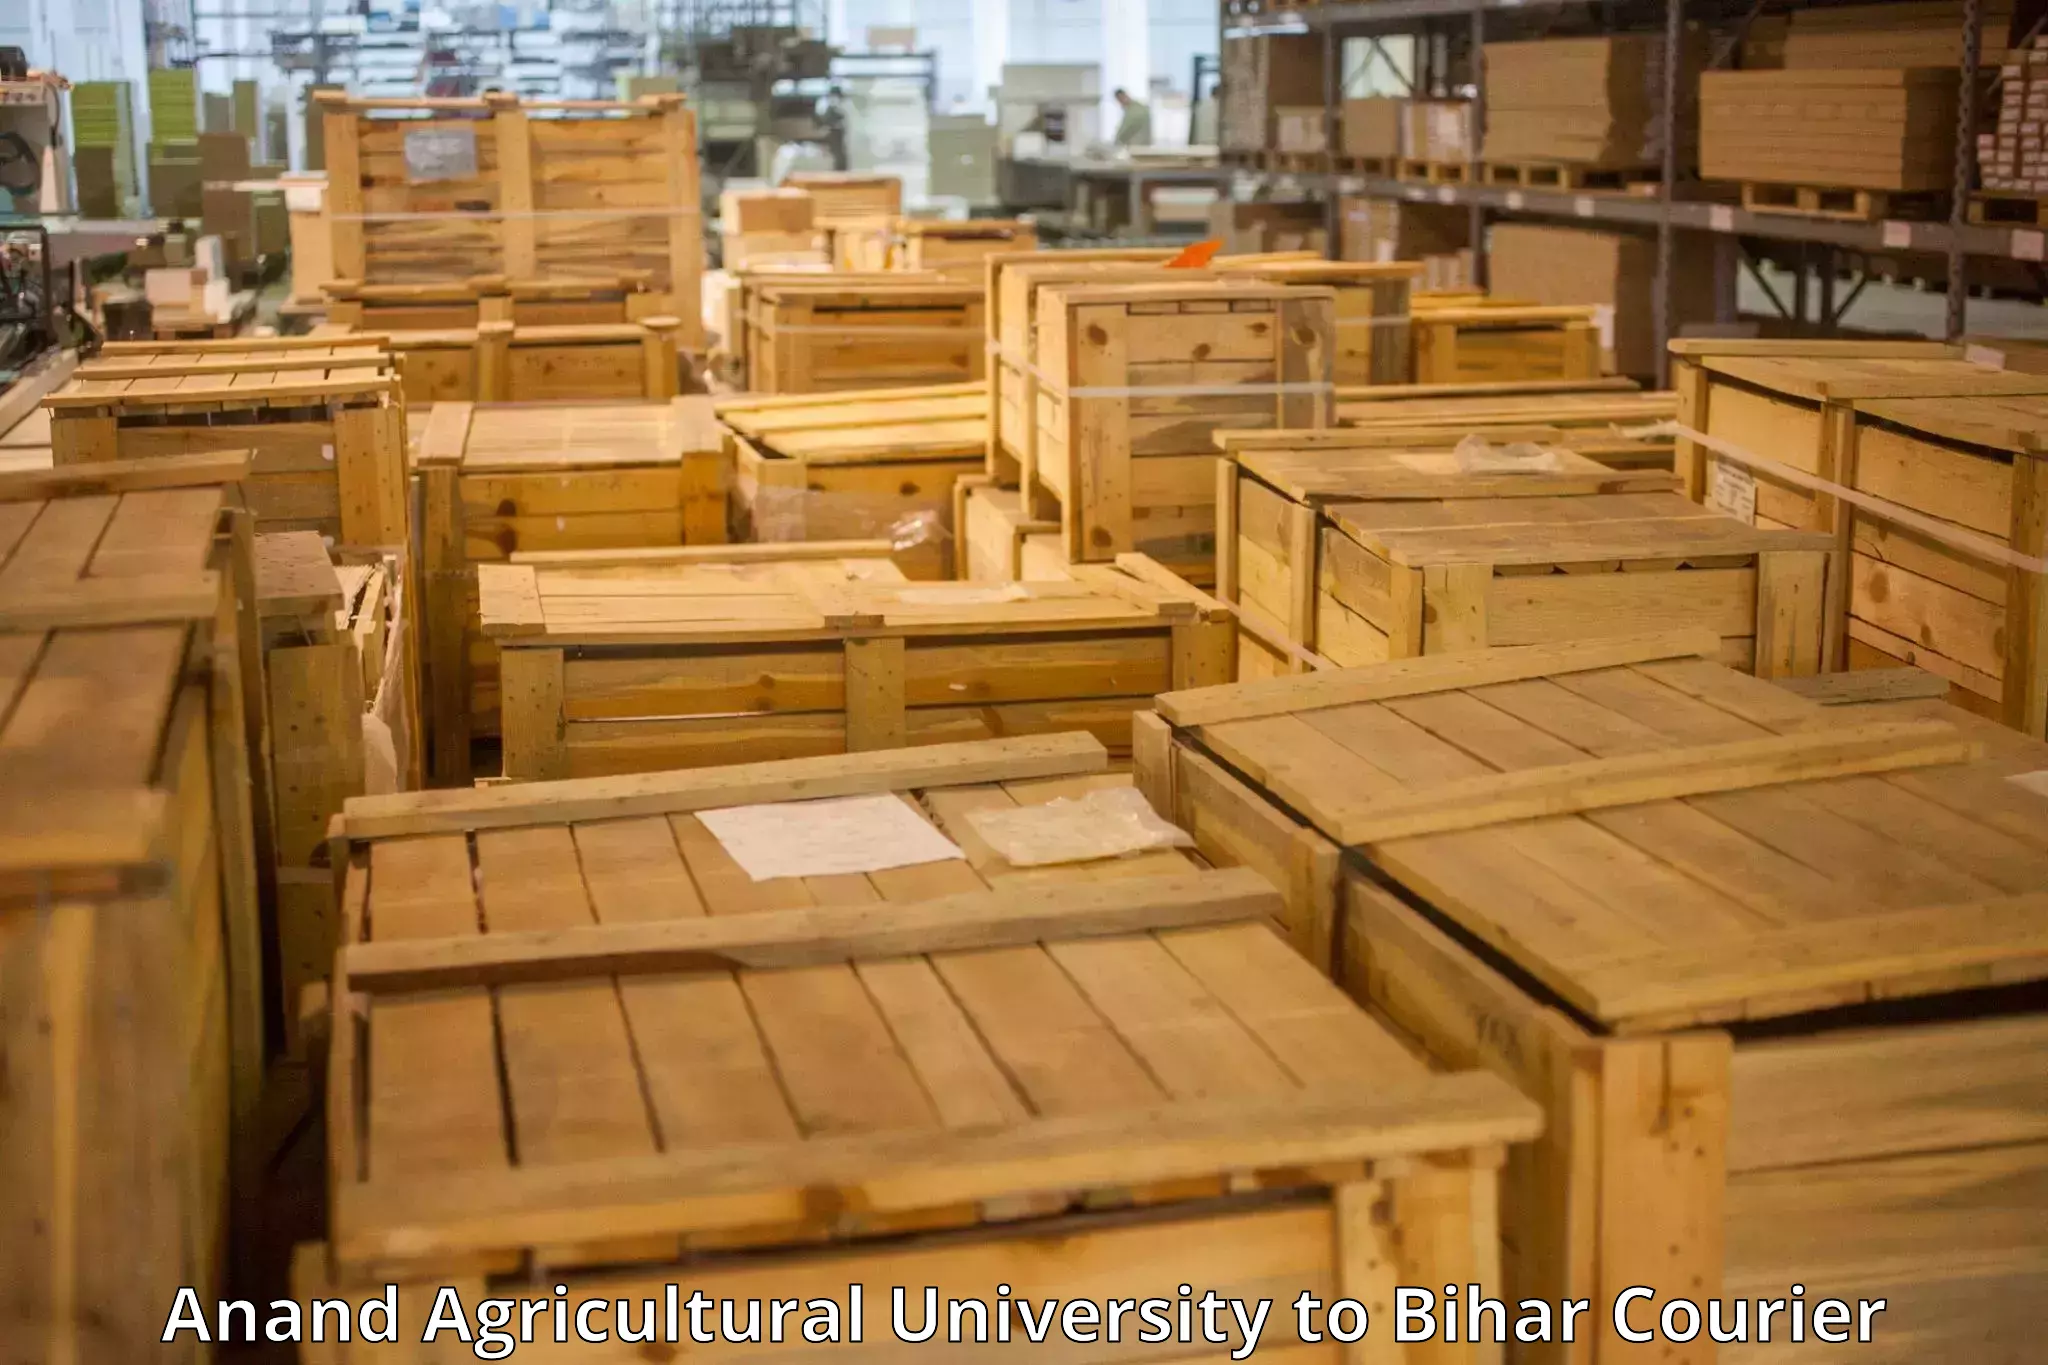 Baggage shipping service Anand Agricultural University to Sugauli